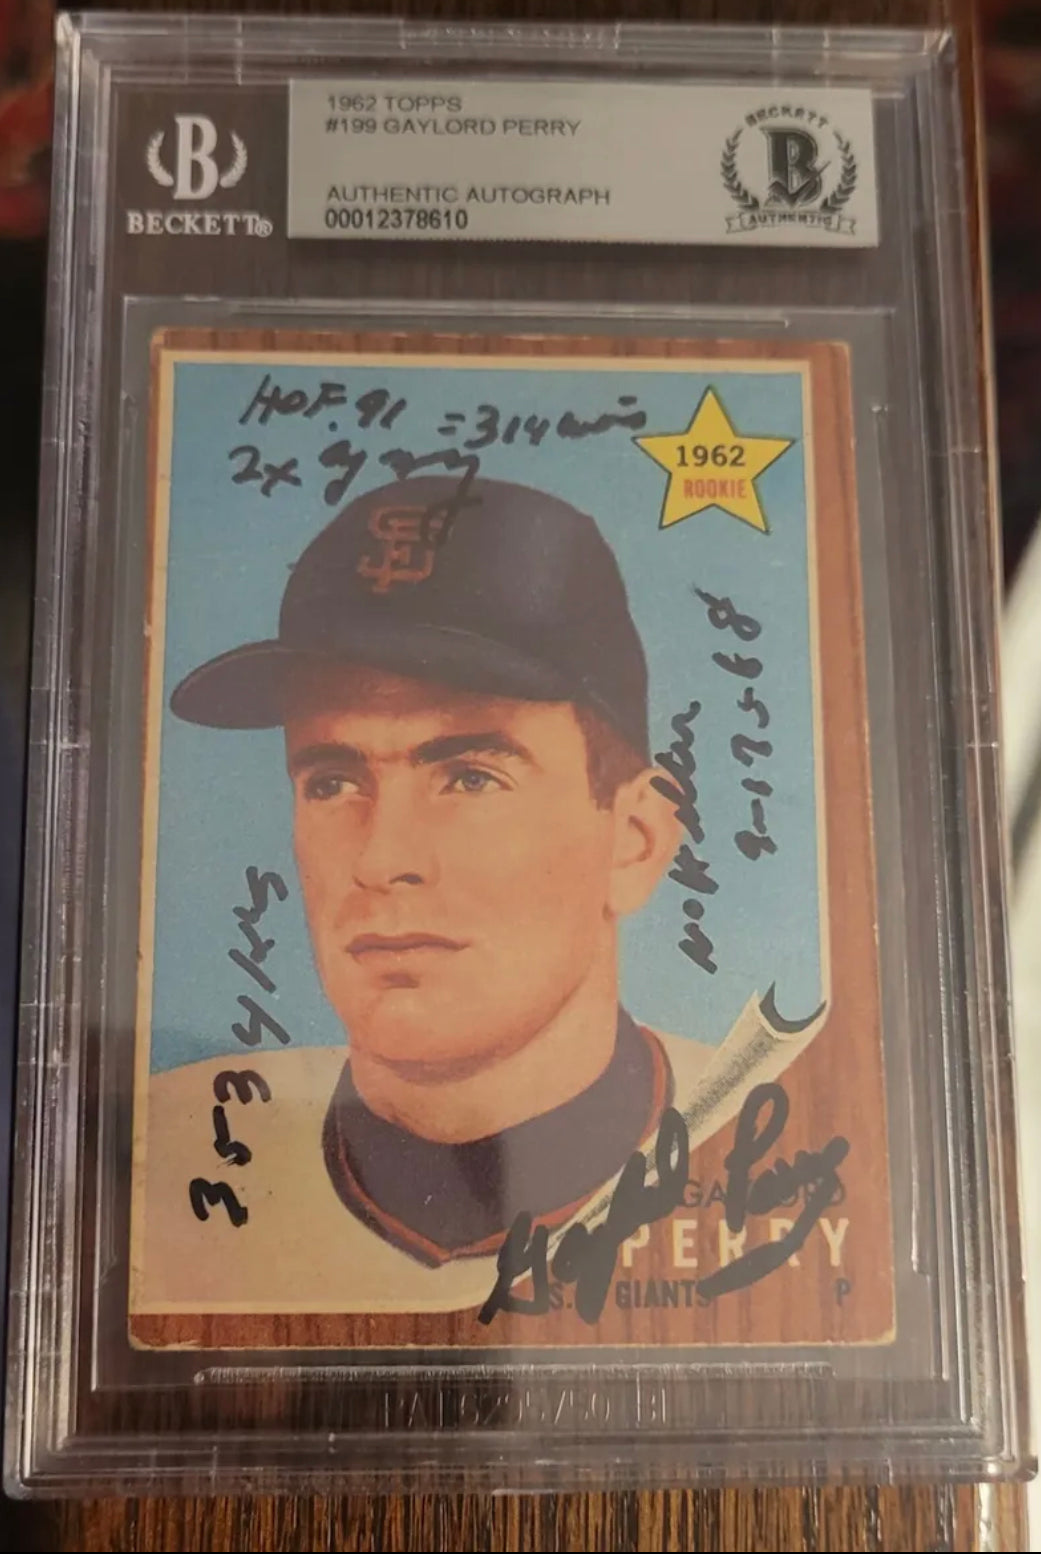 1962 TOPPS GAYLORD PERRY SIGNED ROOKIE RC AUTO GIANTS BECKETT BAS  AUTOGRAPHED 1/1?